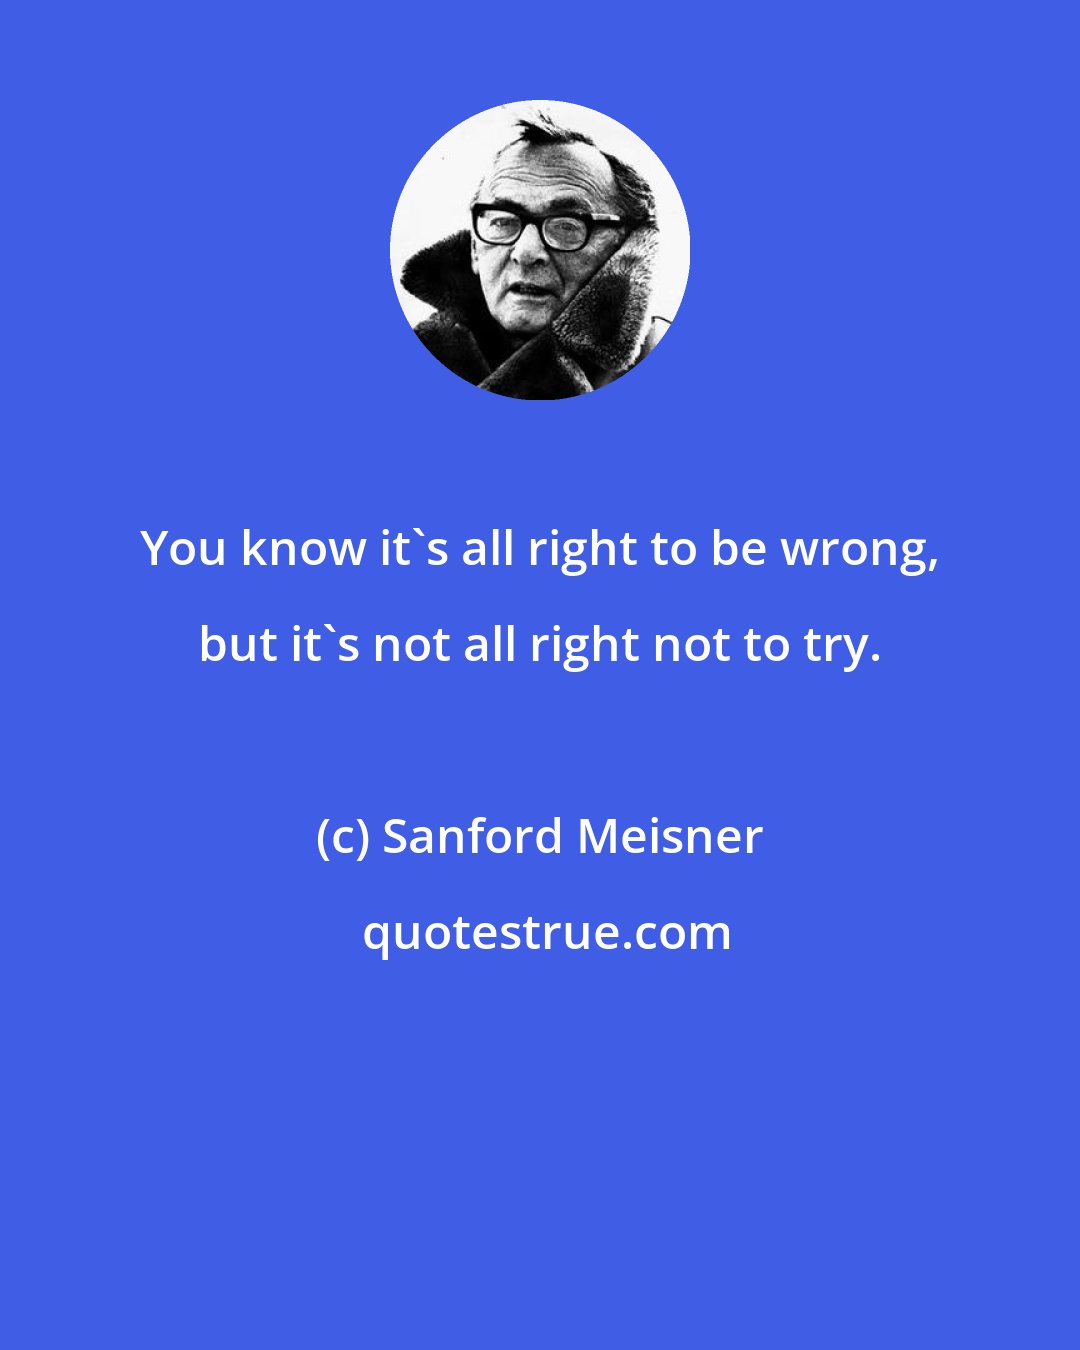 Sanford Meisner: You know it's all right to be wrong, but it's not all right not to try.